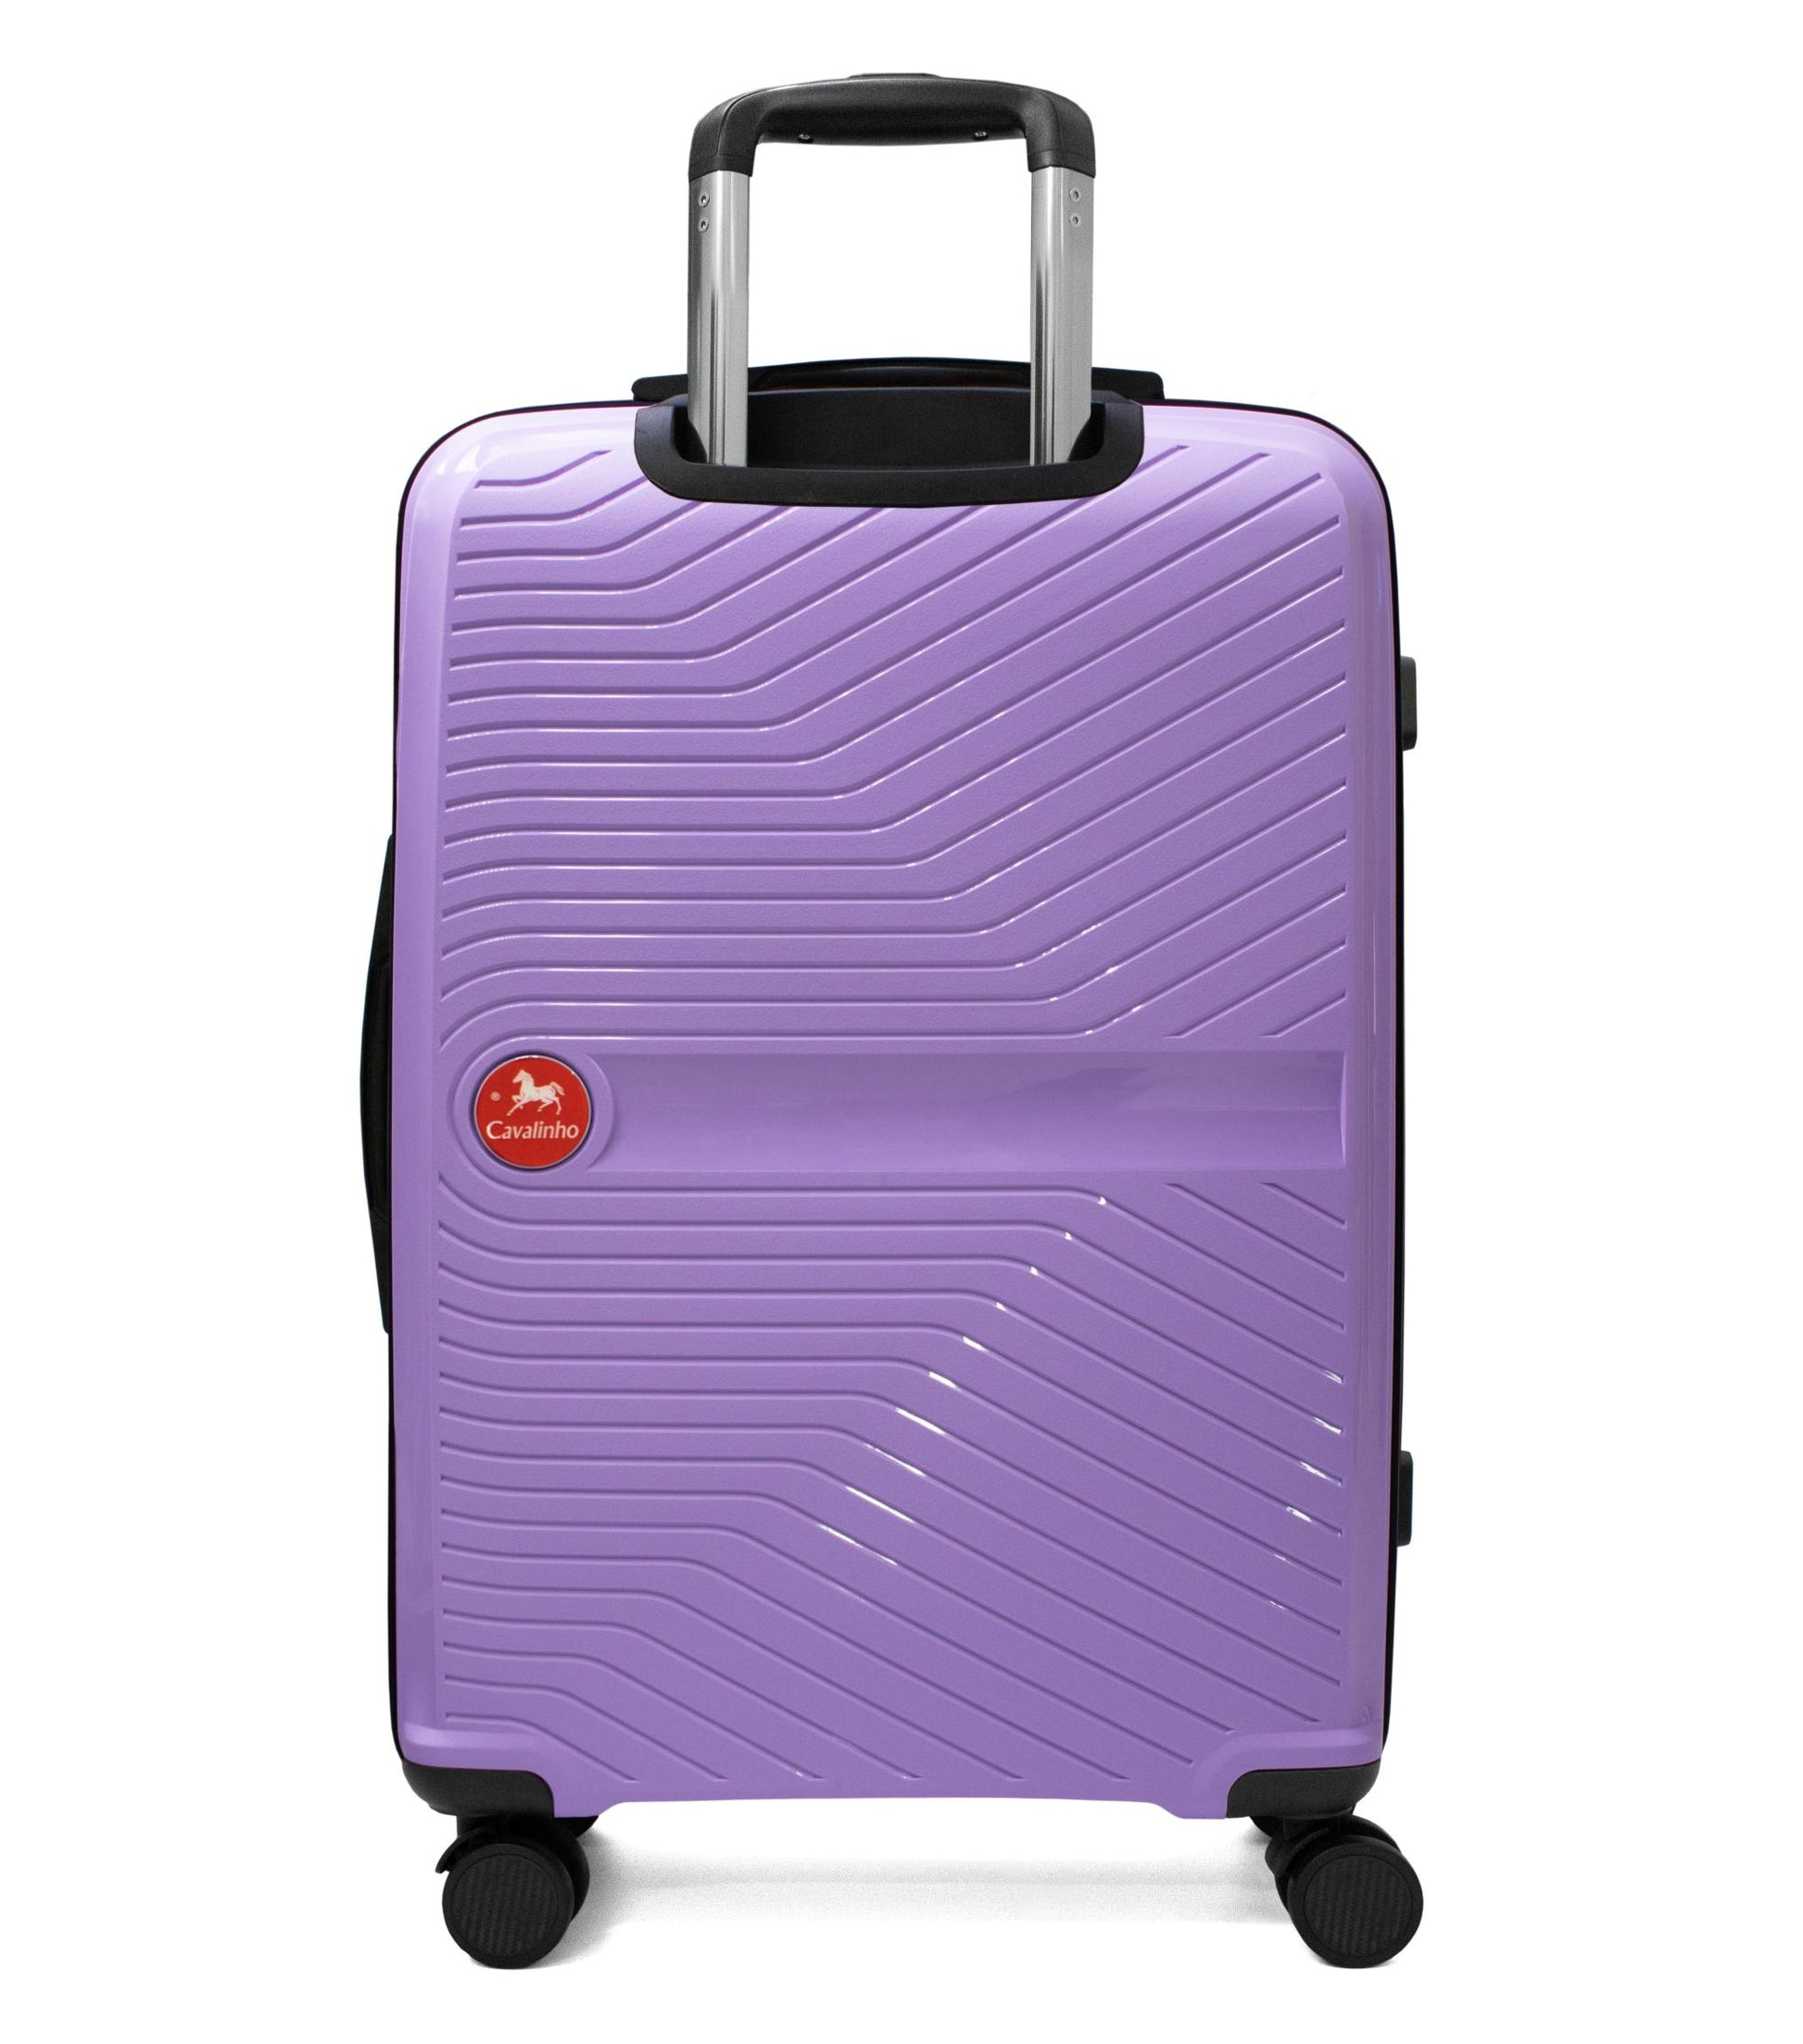 Cavalinho Colorful Check-in Hardside Luggage (24") - 24 inch Lilac - 68020004.39.24_3